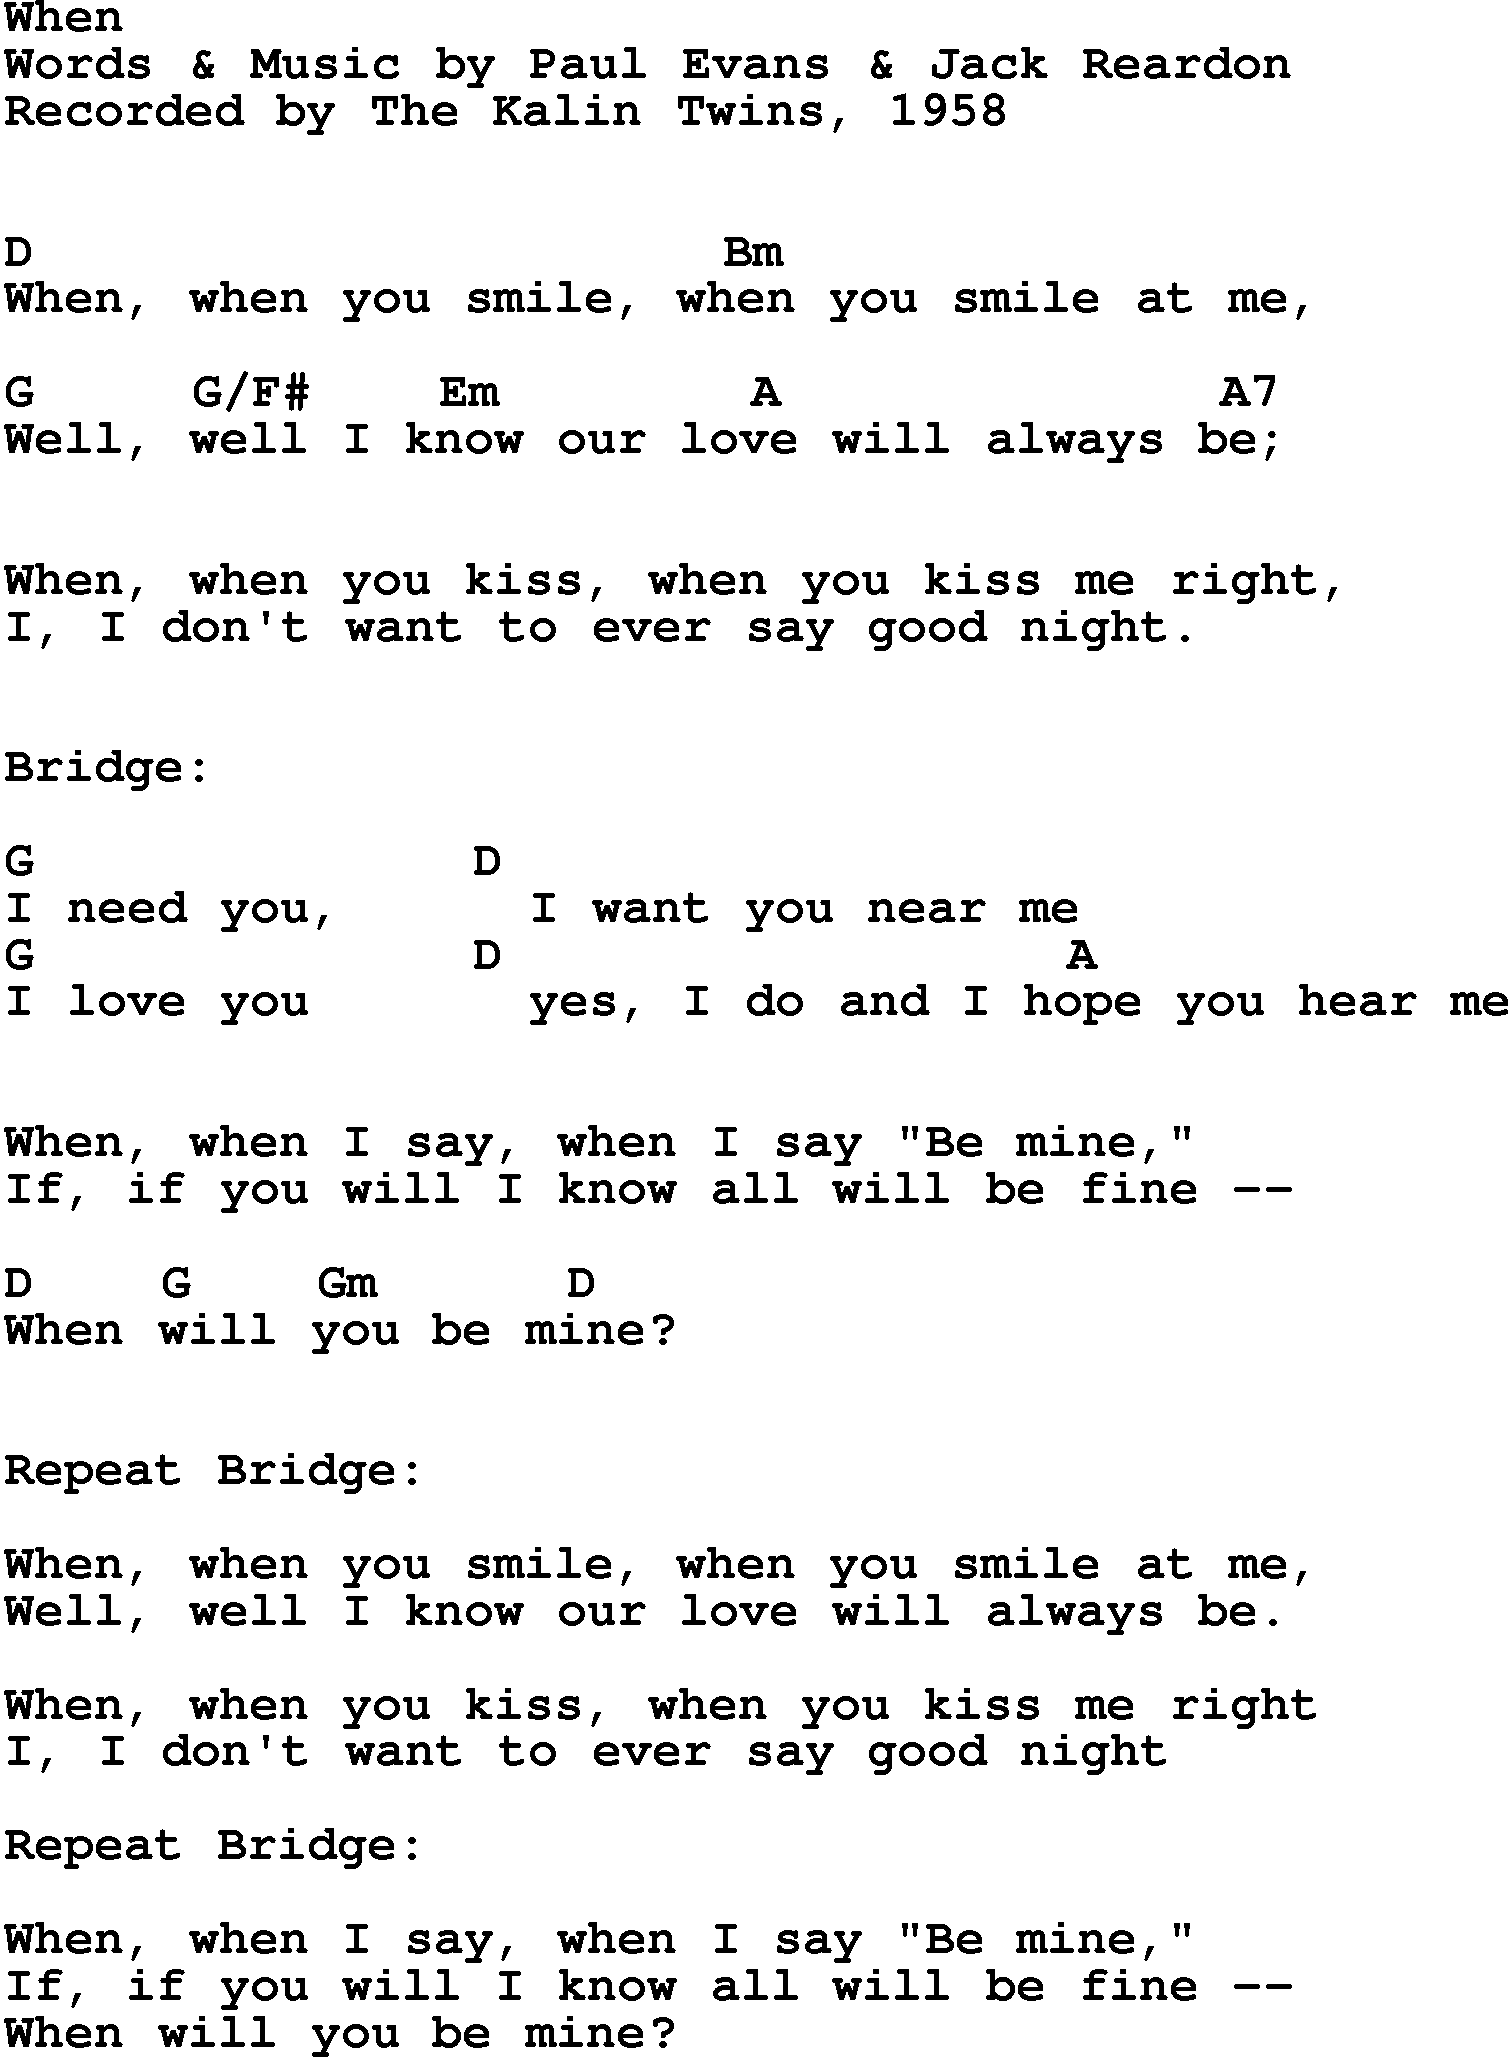 Song Lyrics with guitar chords for When - The Kalin Twins, 1958